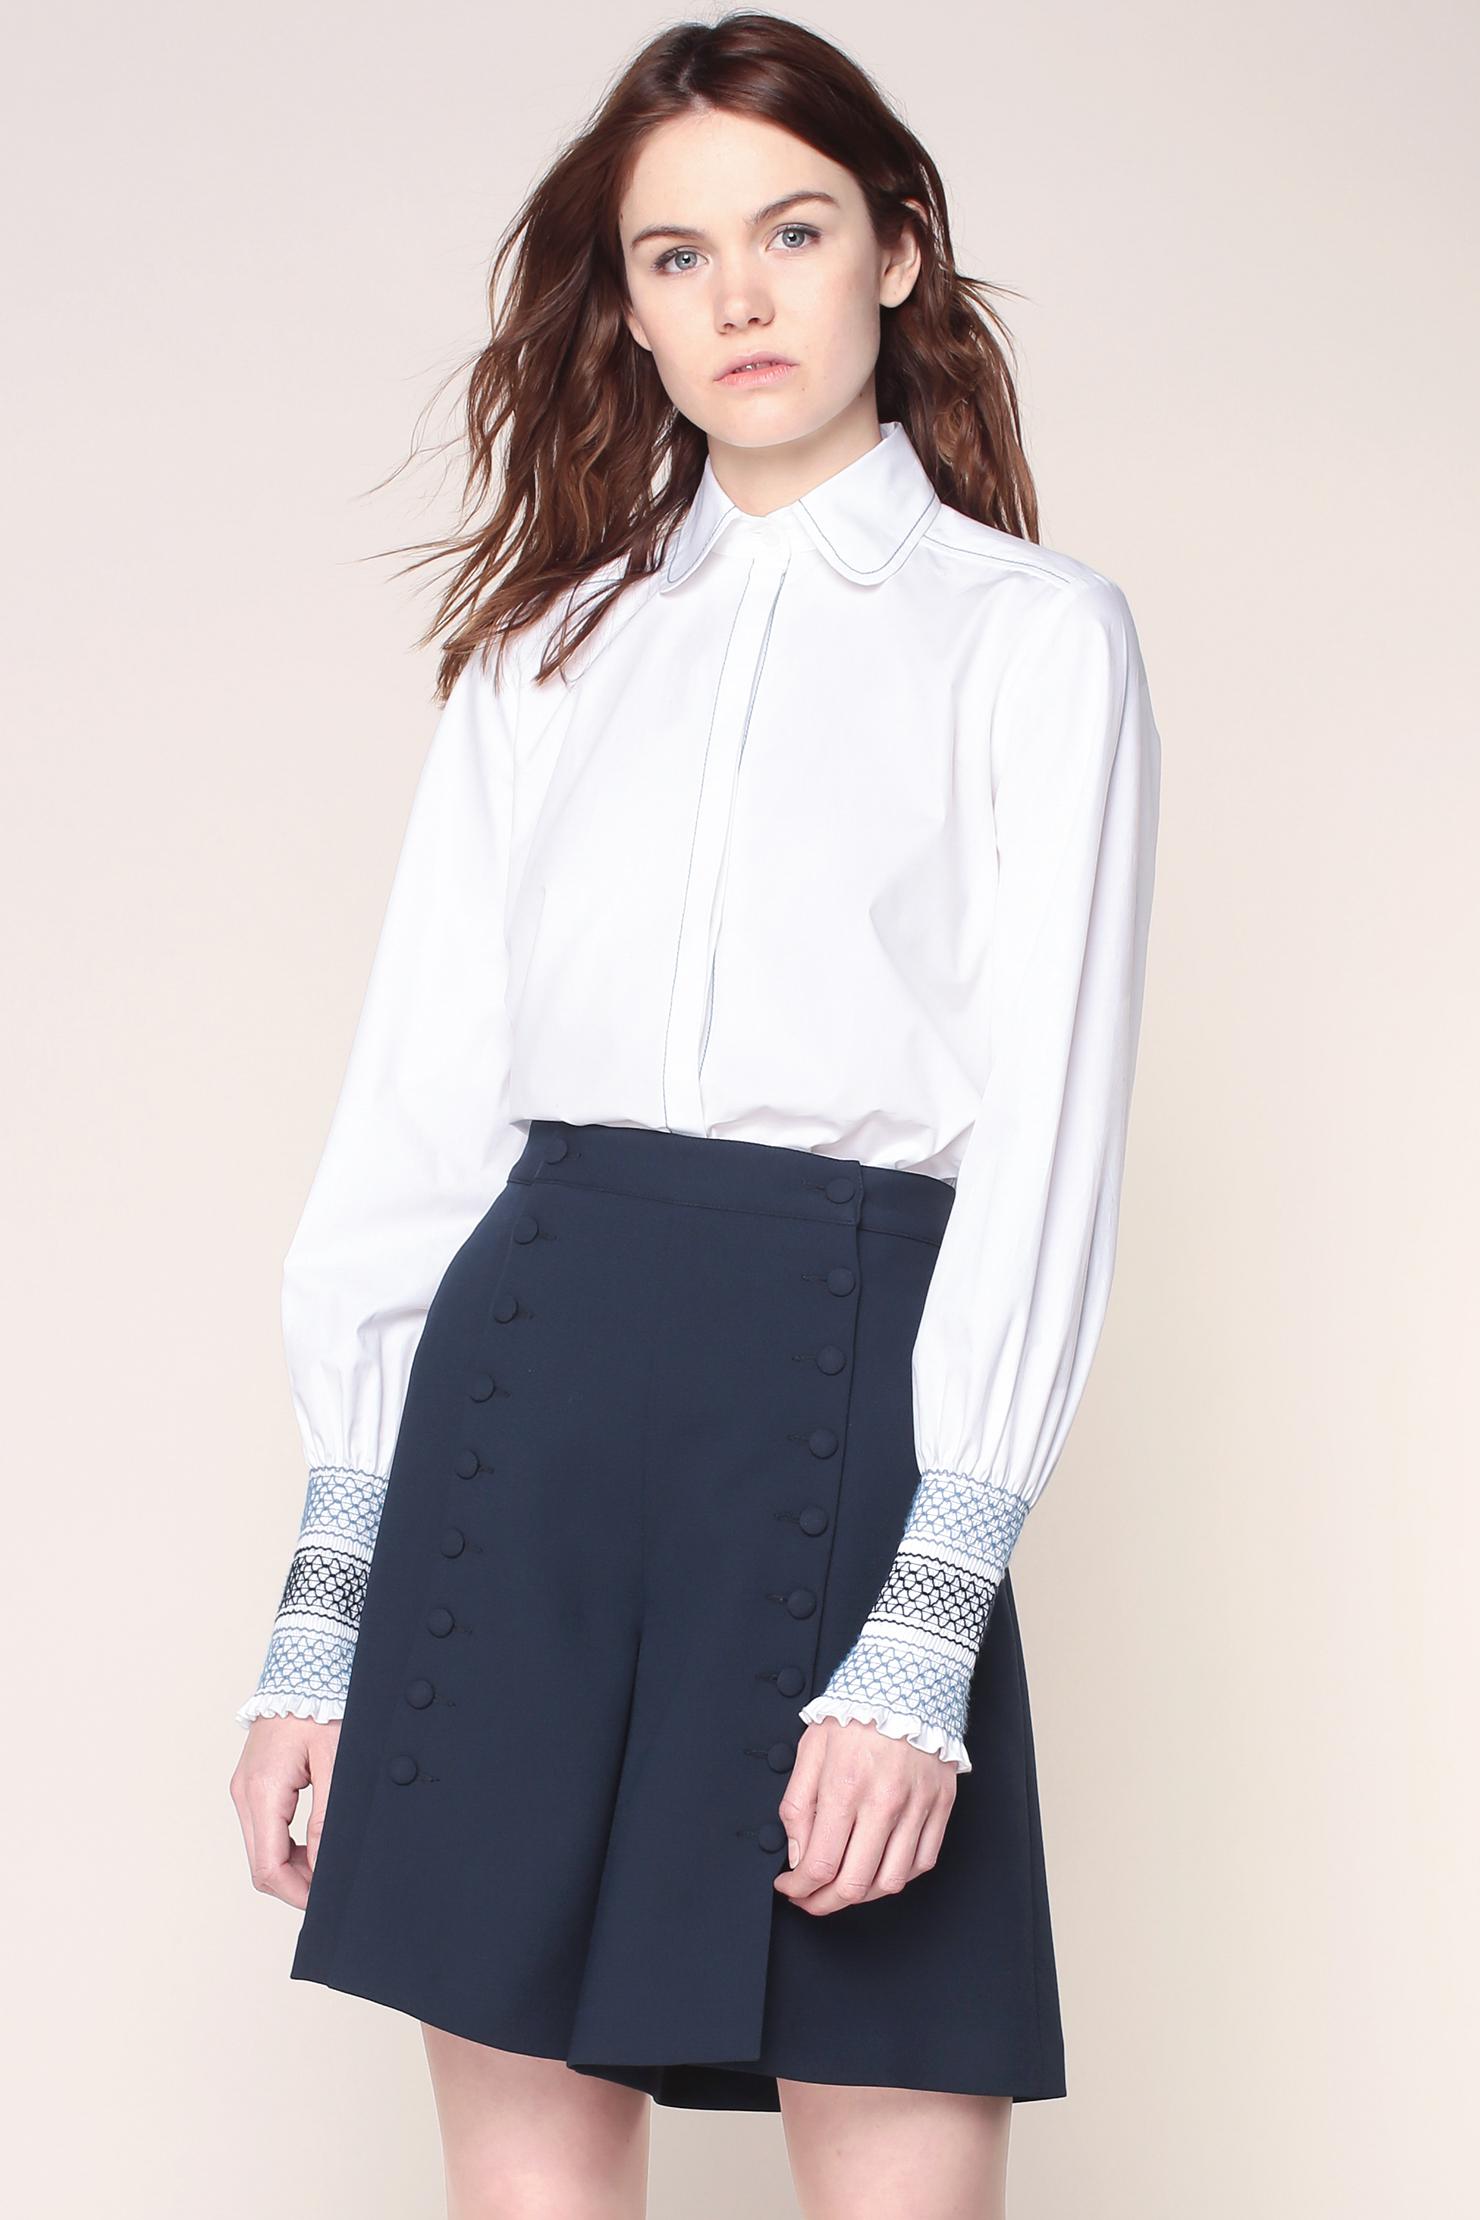 See by Chloé | Cotton Shirt with Smocked Cuffs | Women's blouses ...